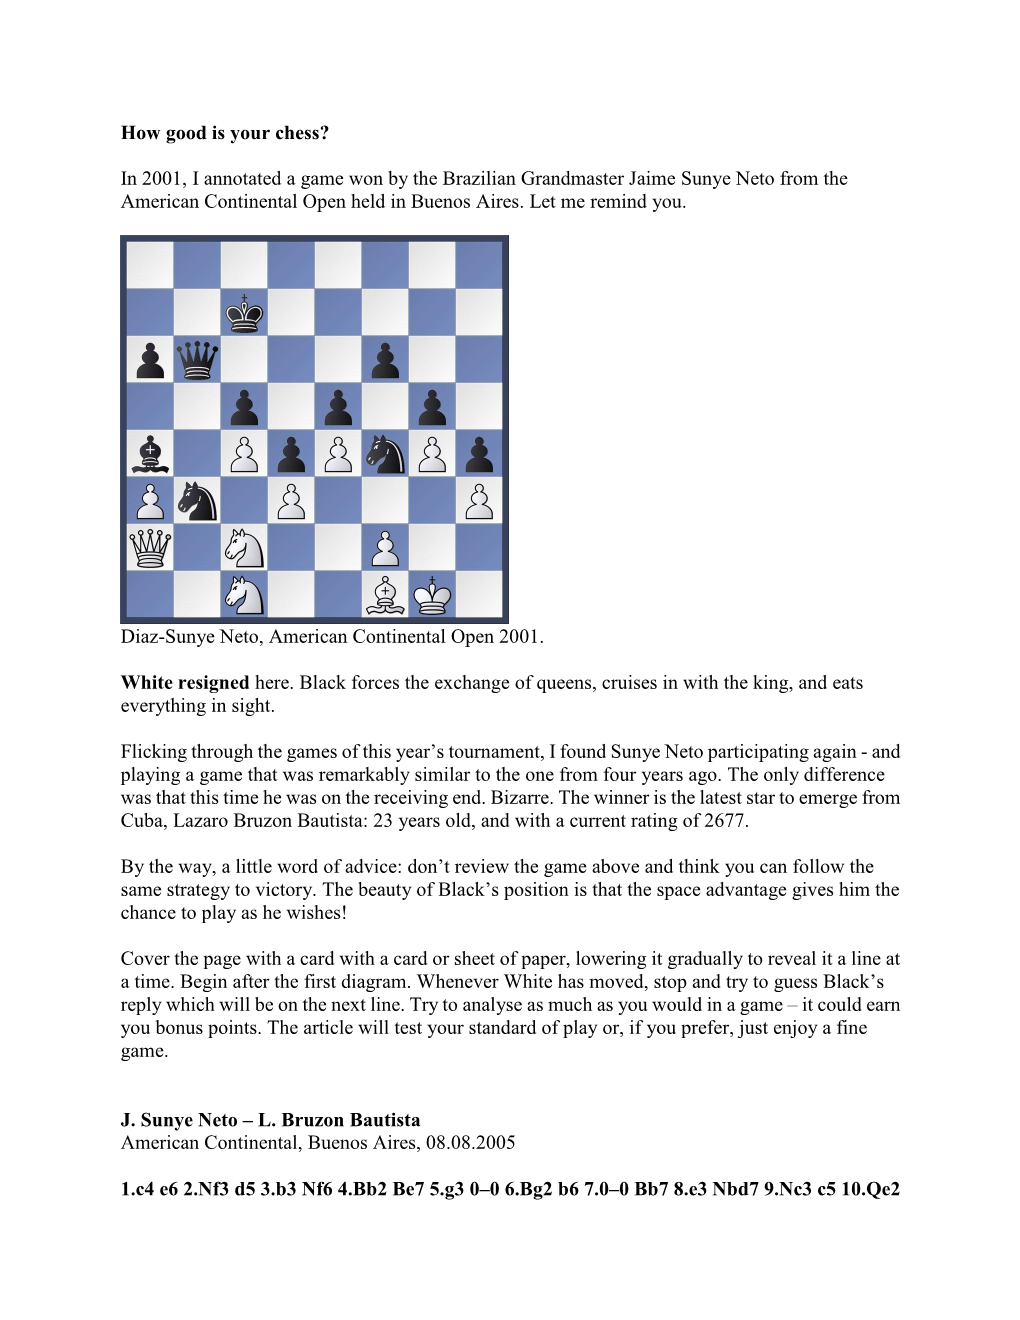 How Good Is Your Chess? in 2001, I Annotated a Game Won by The